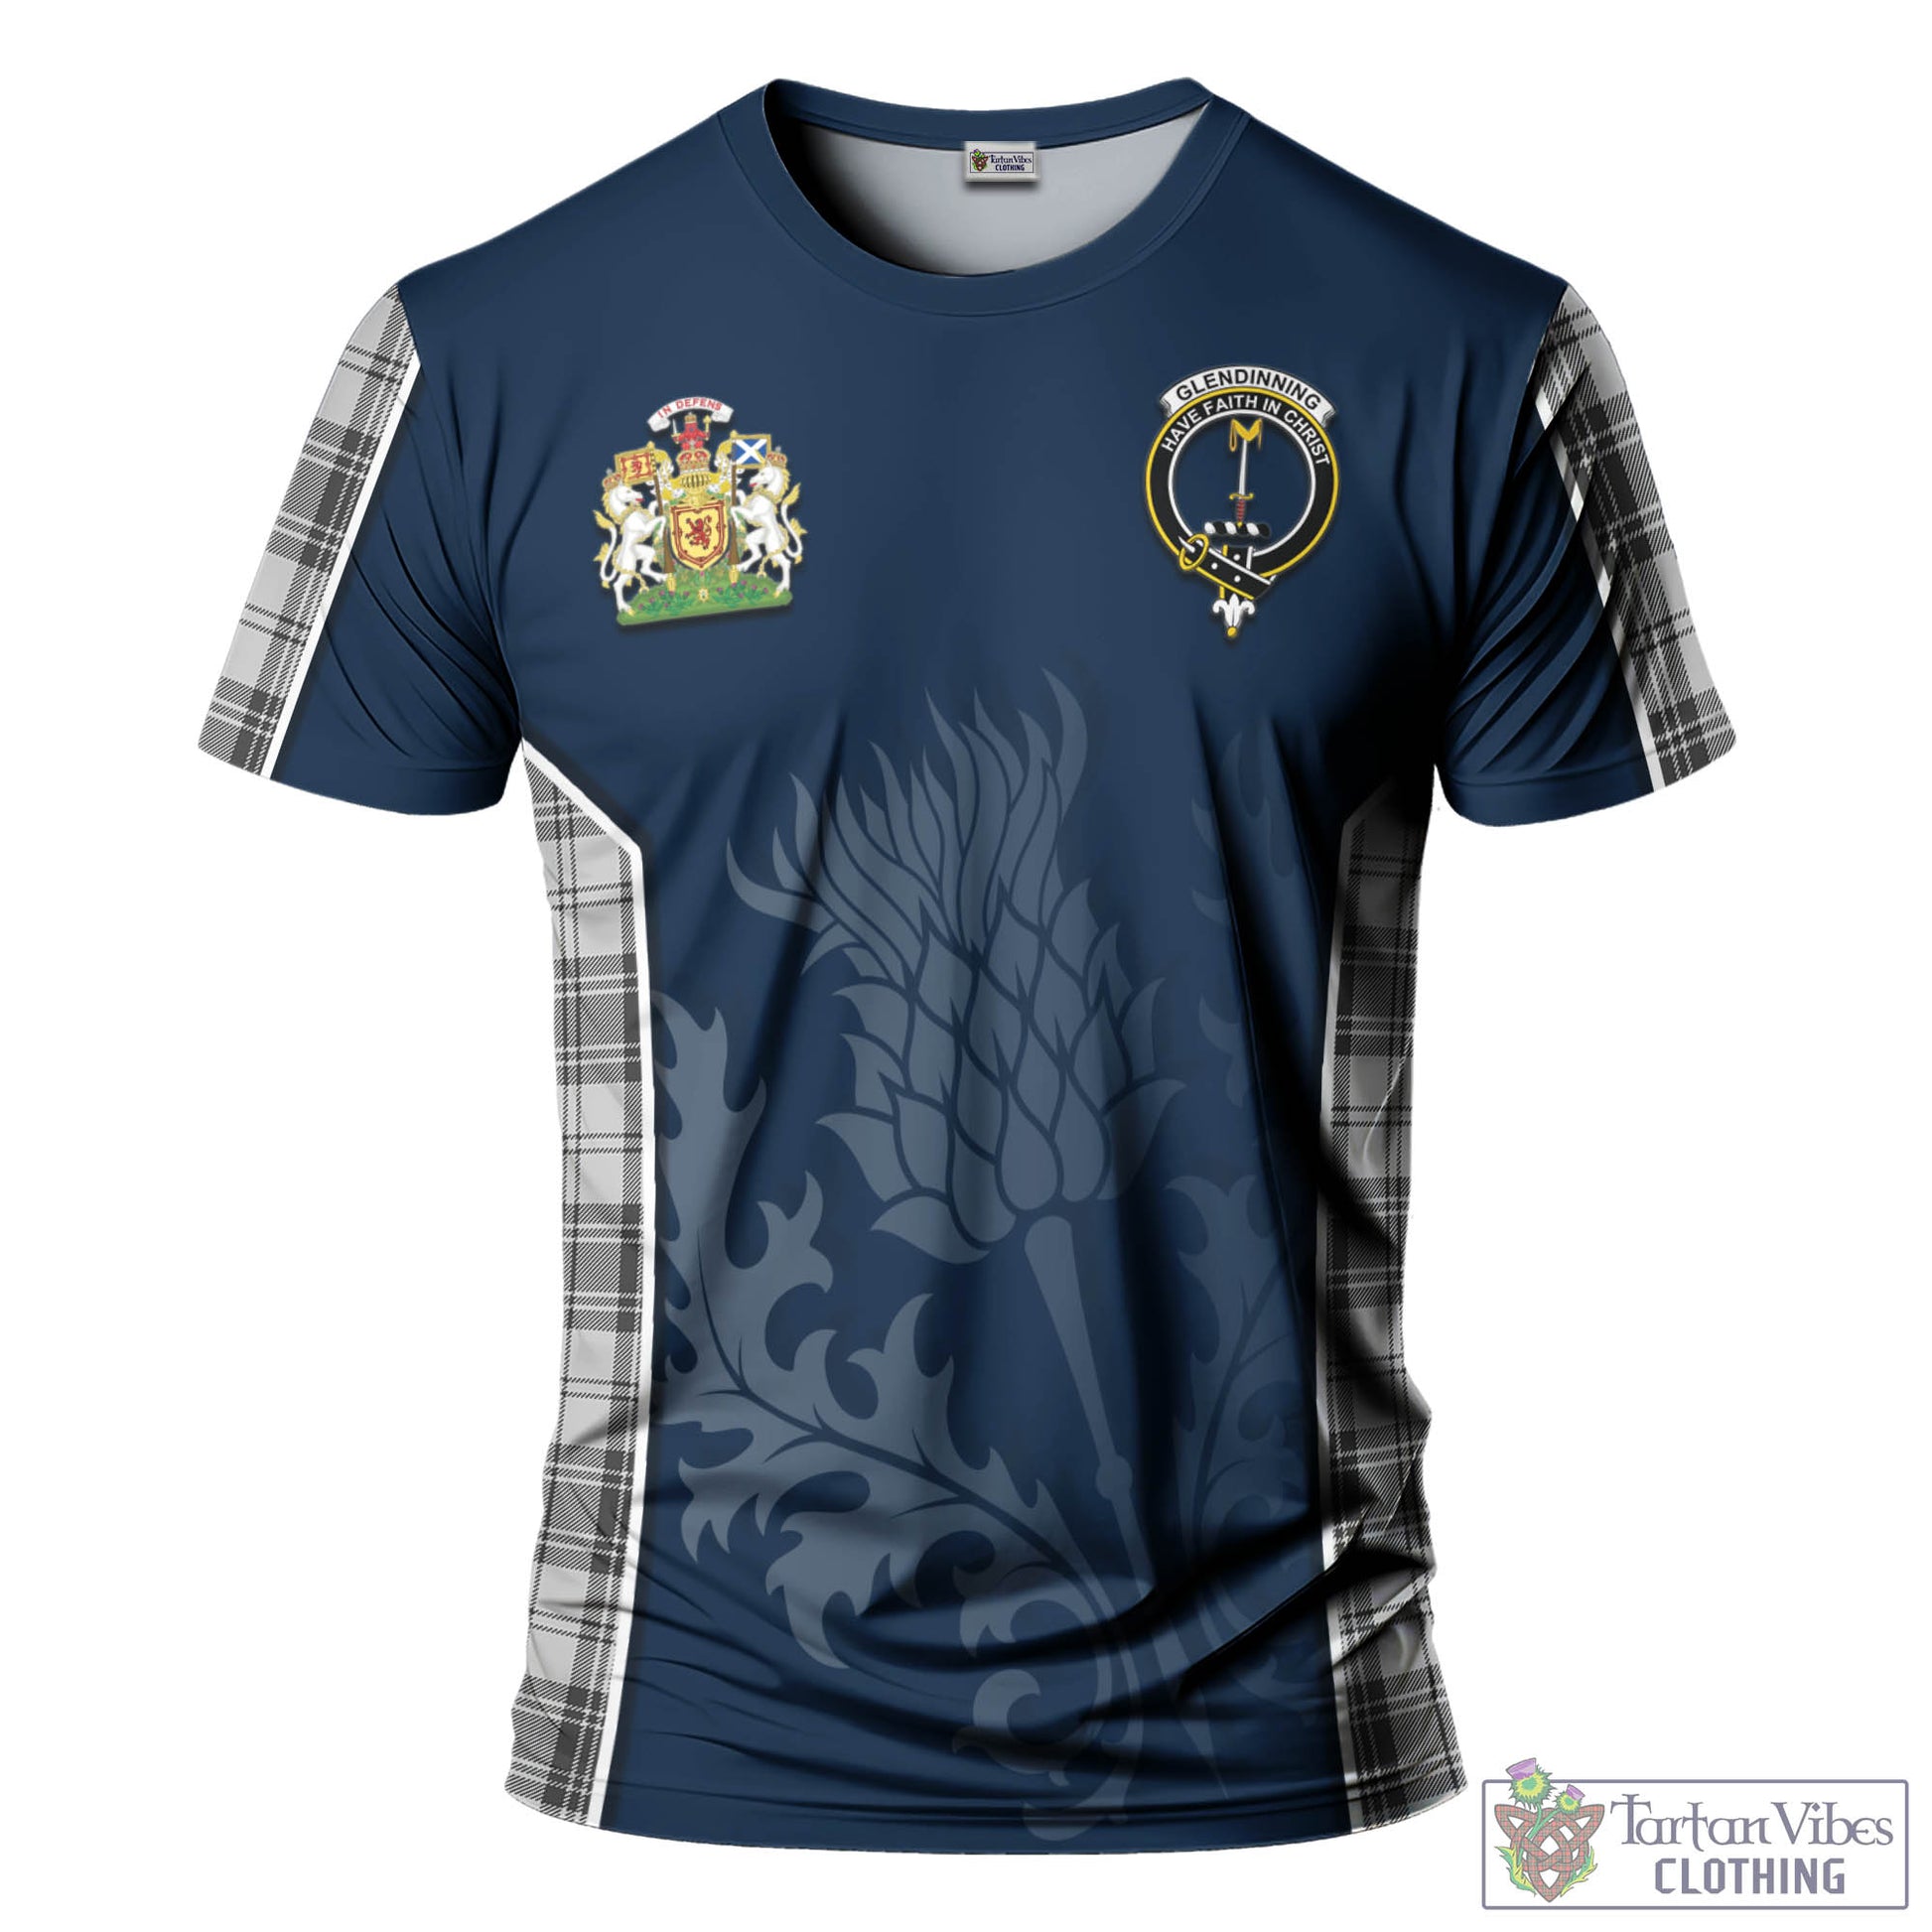 Tartan Vibes Clothing Glendinning Tartan T-Shirt with Family Crest and Scottish Thistle Vibes Sport Style